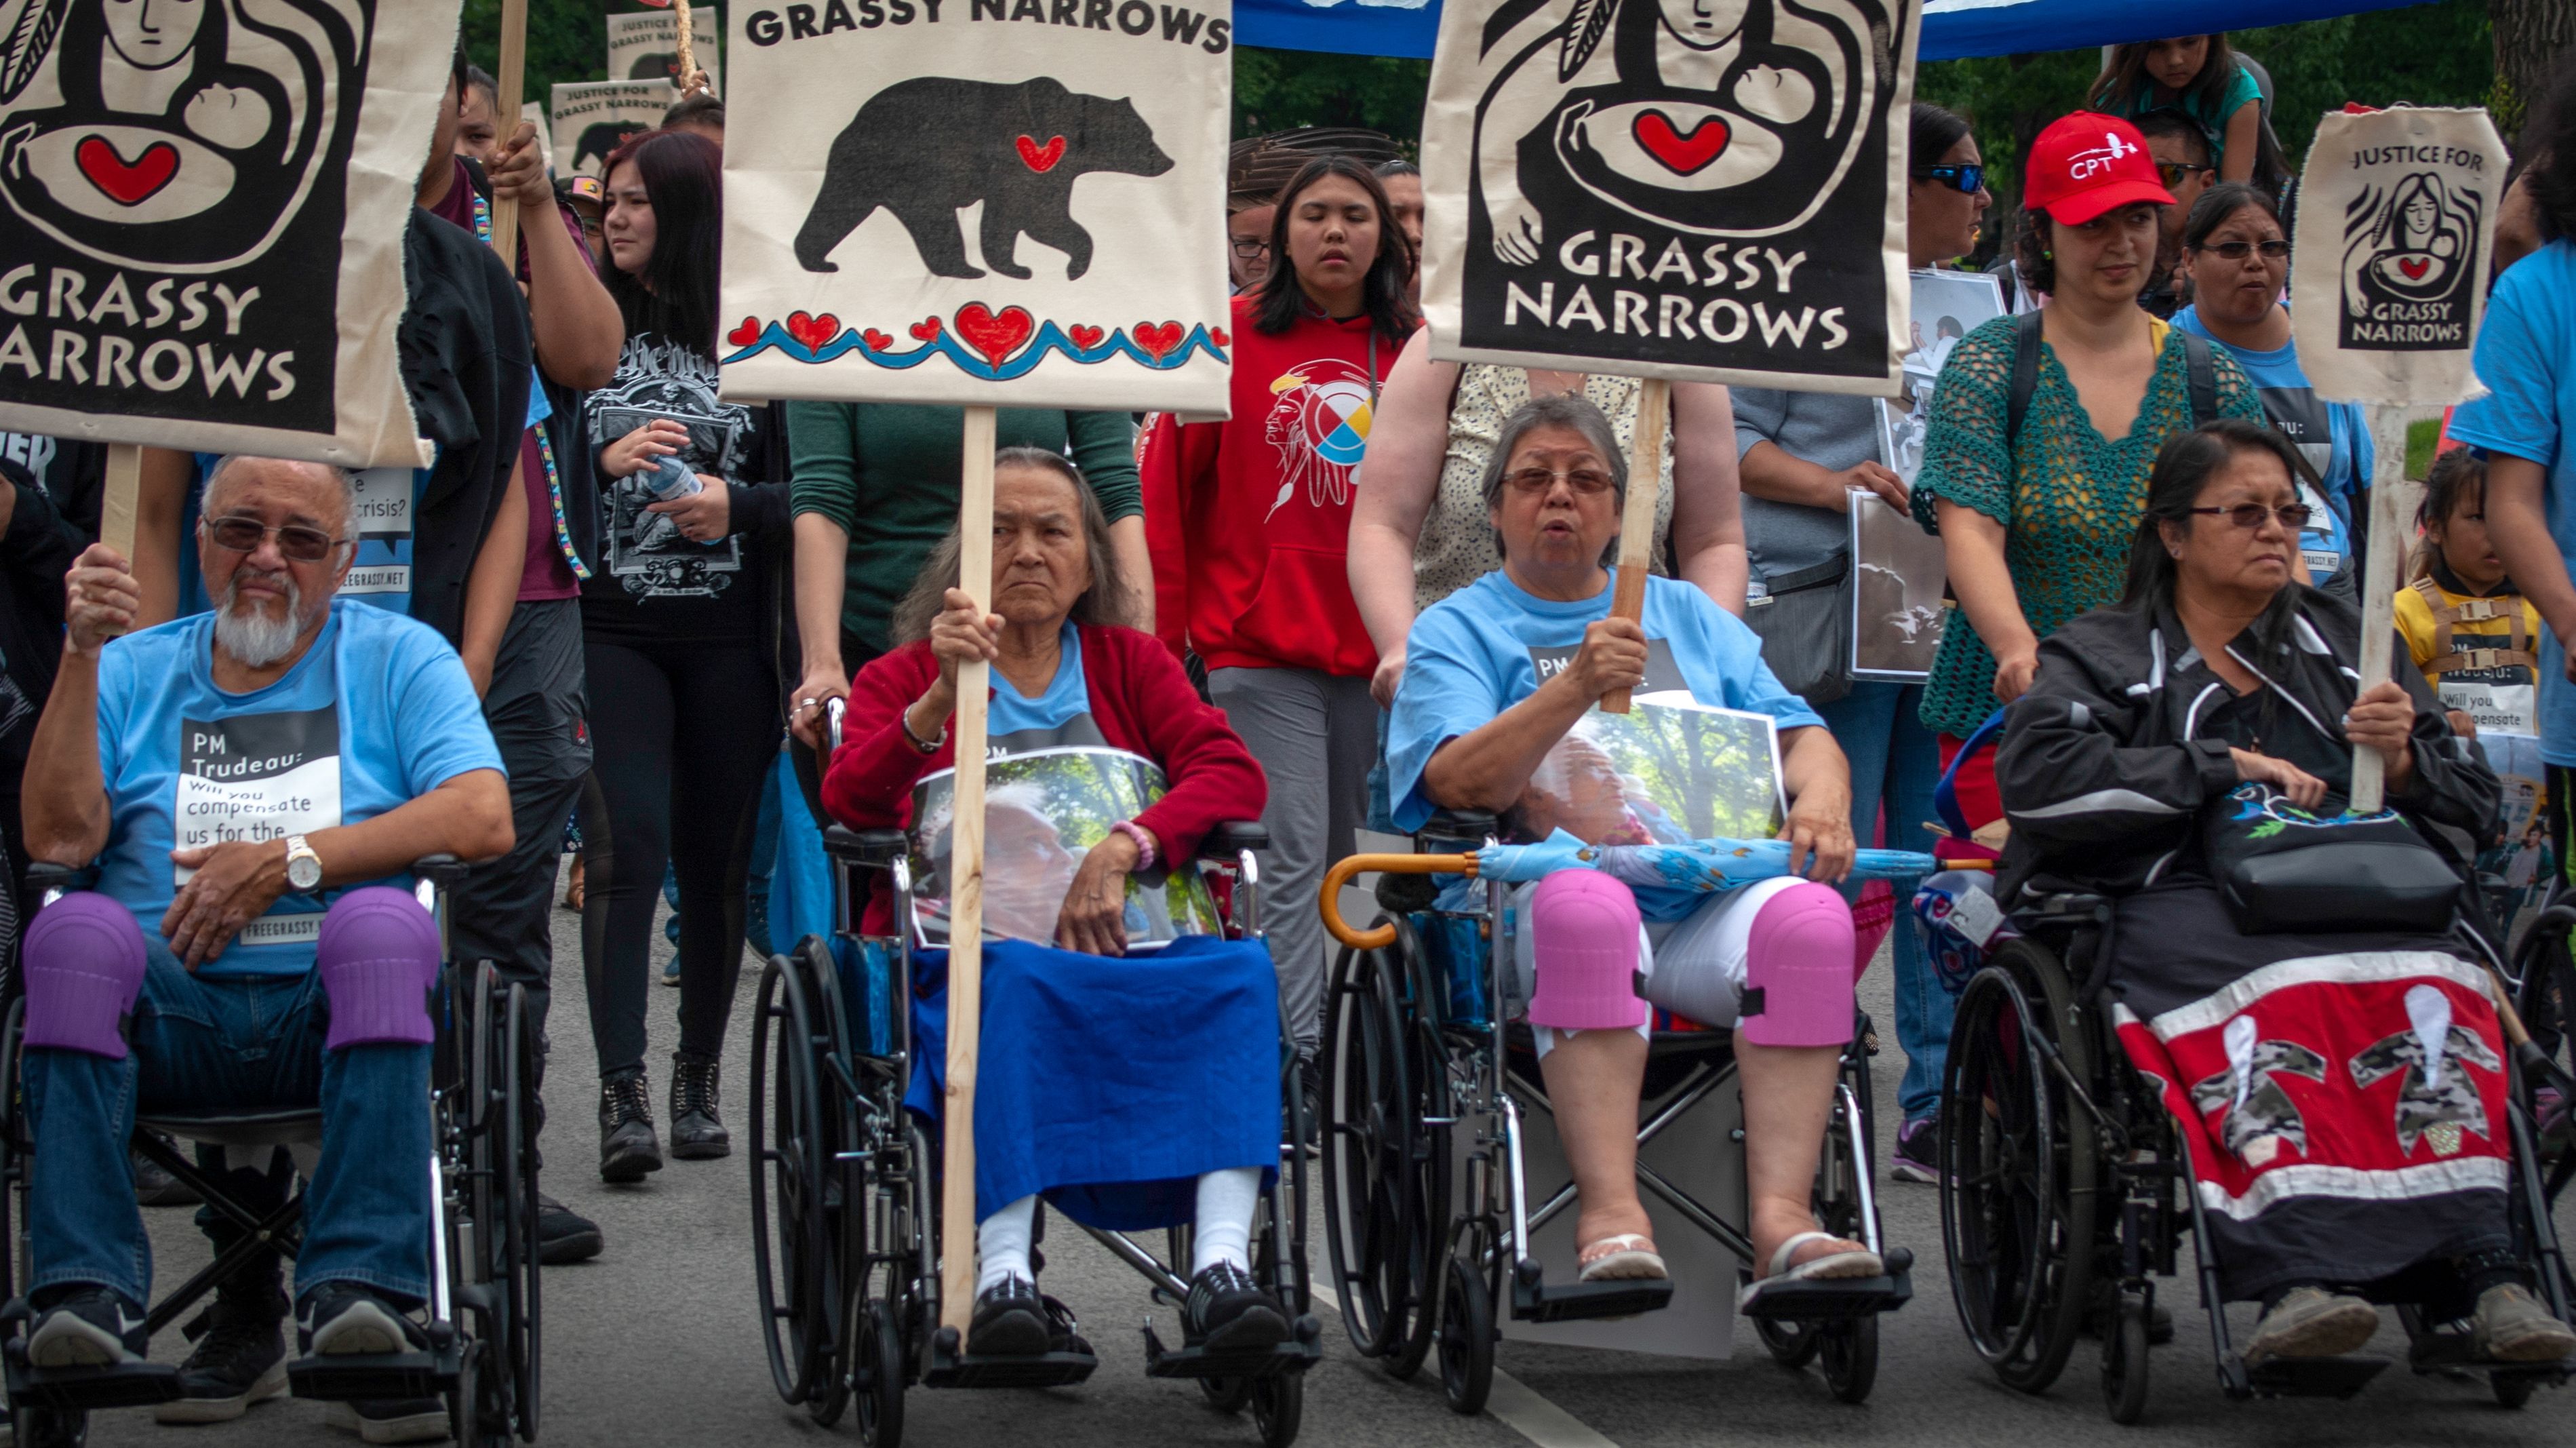 A group of elders including Raphael Fobister (far left) and Judy Da Silva (far right) help to lead the community's march through Toronto. Image by Shelby Gilson. Canada, 2019.